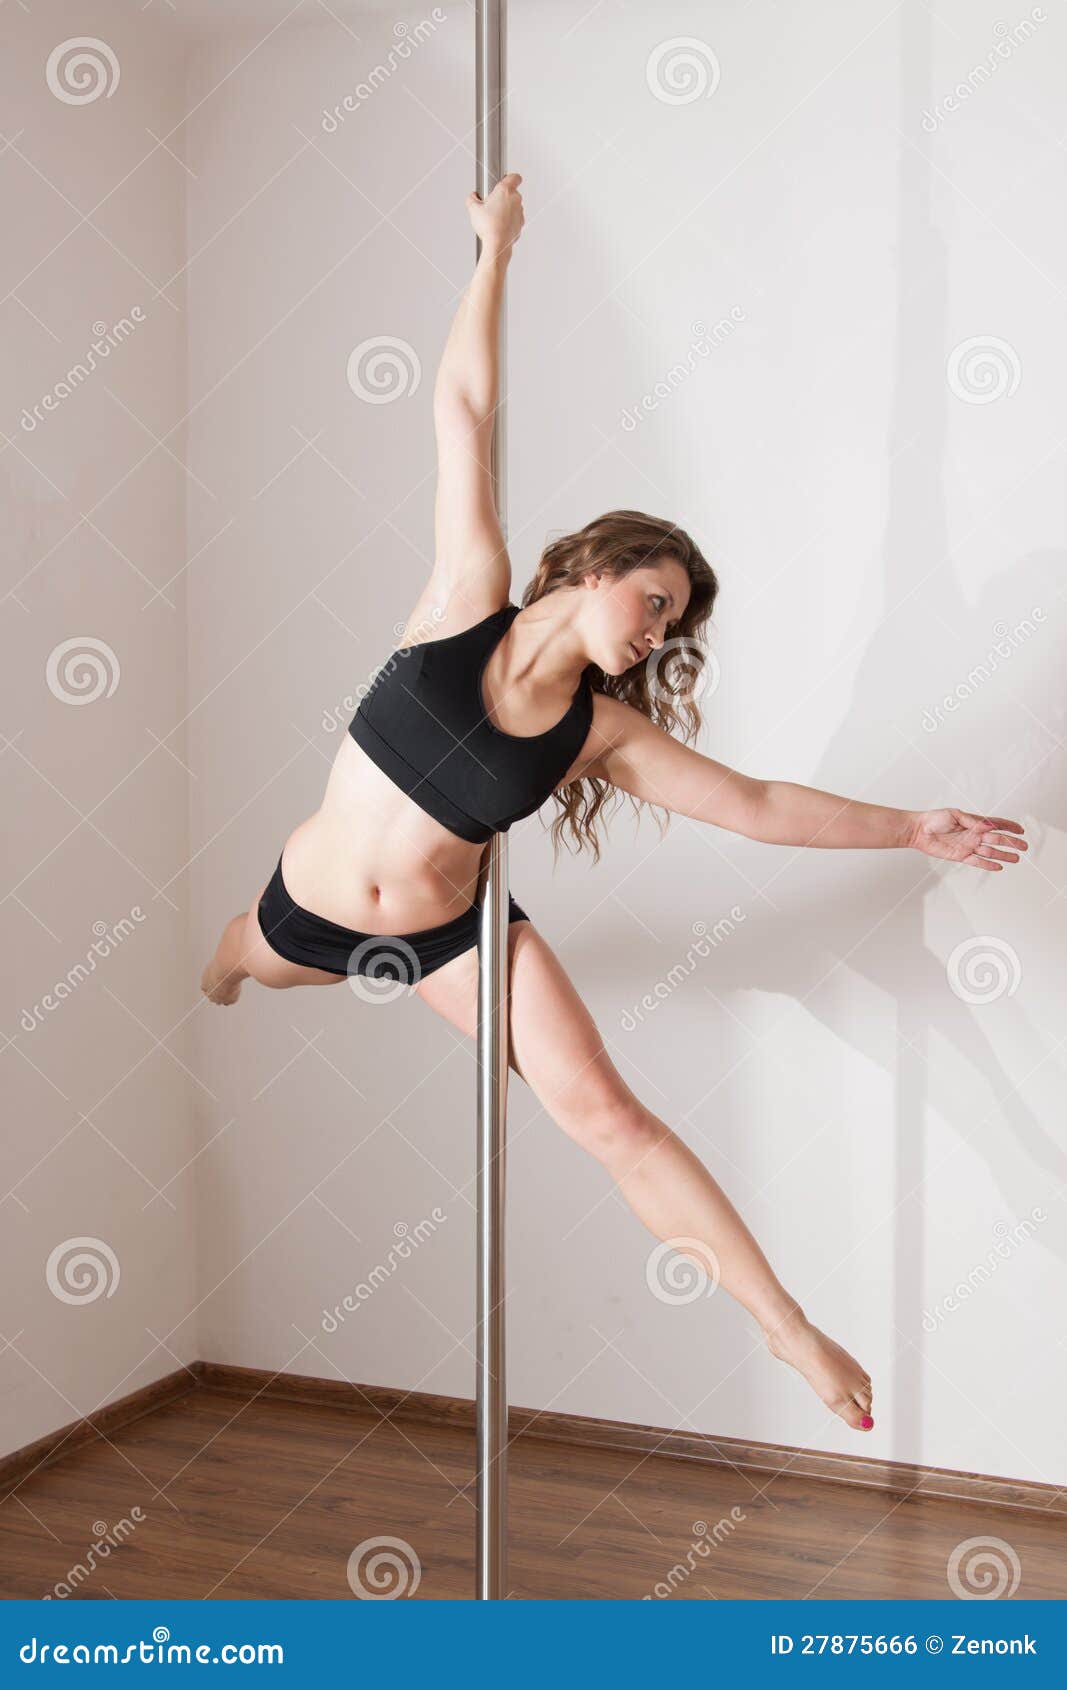 Young woman dancing stock photo. Image of room, adult - 27875666